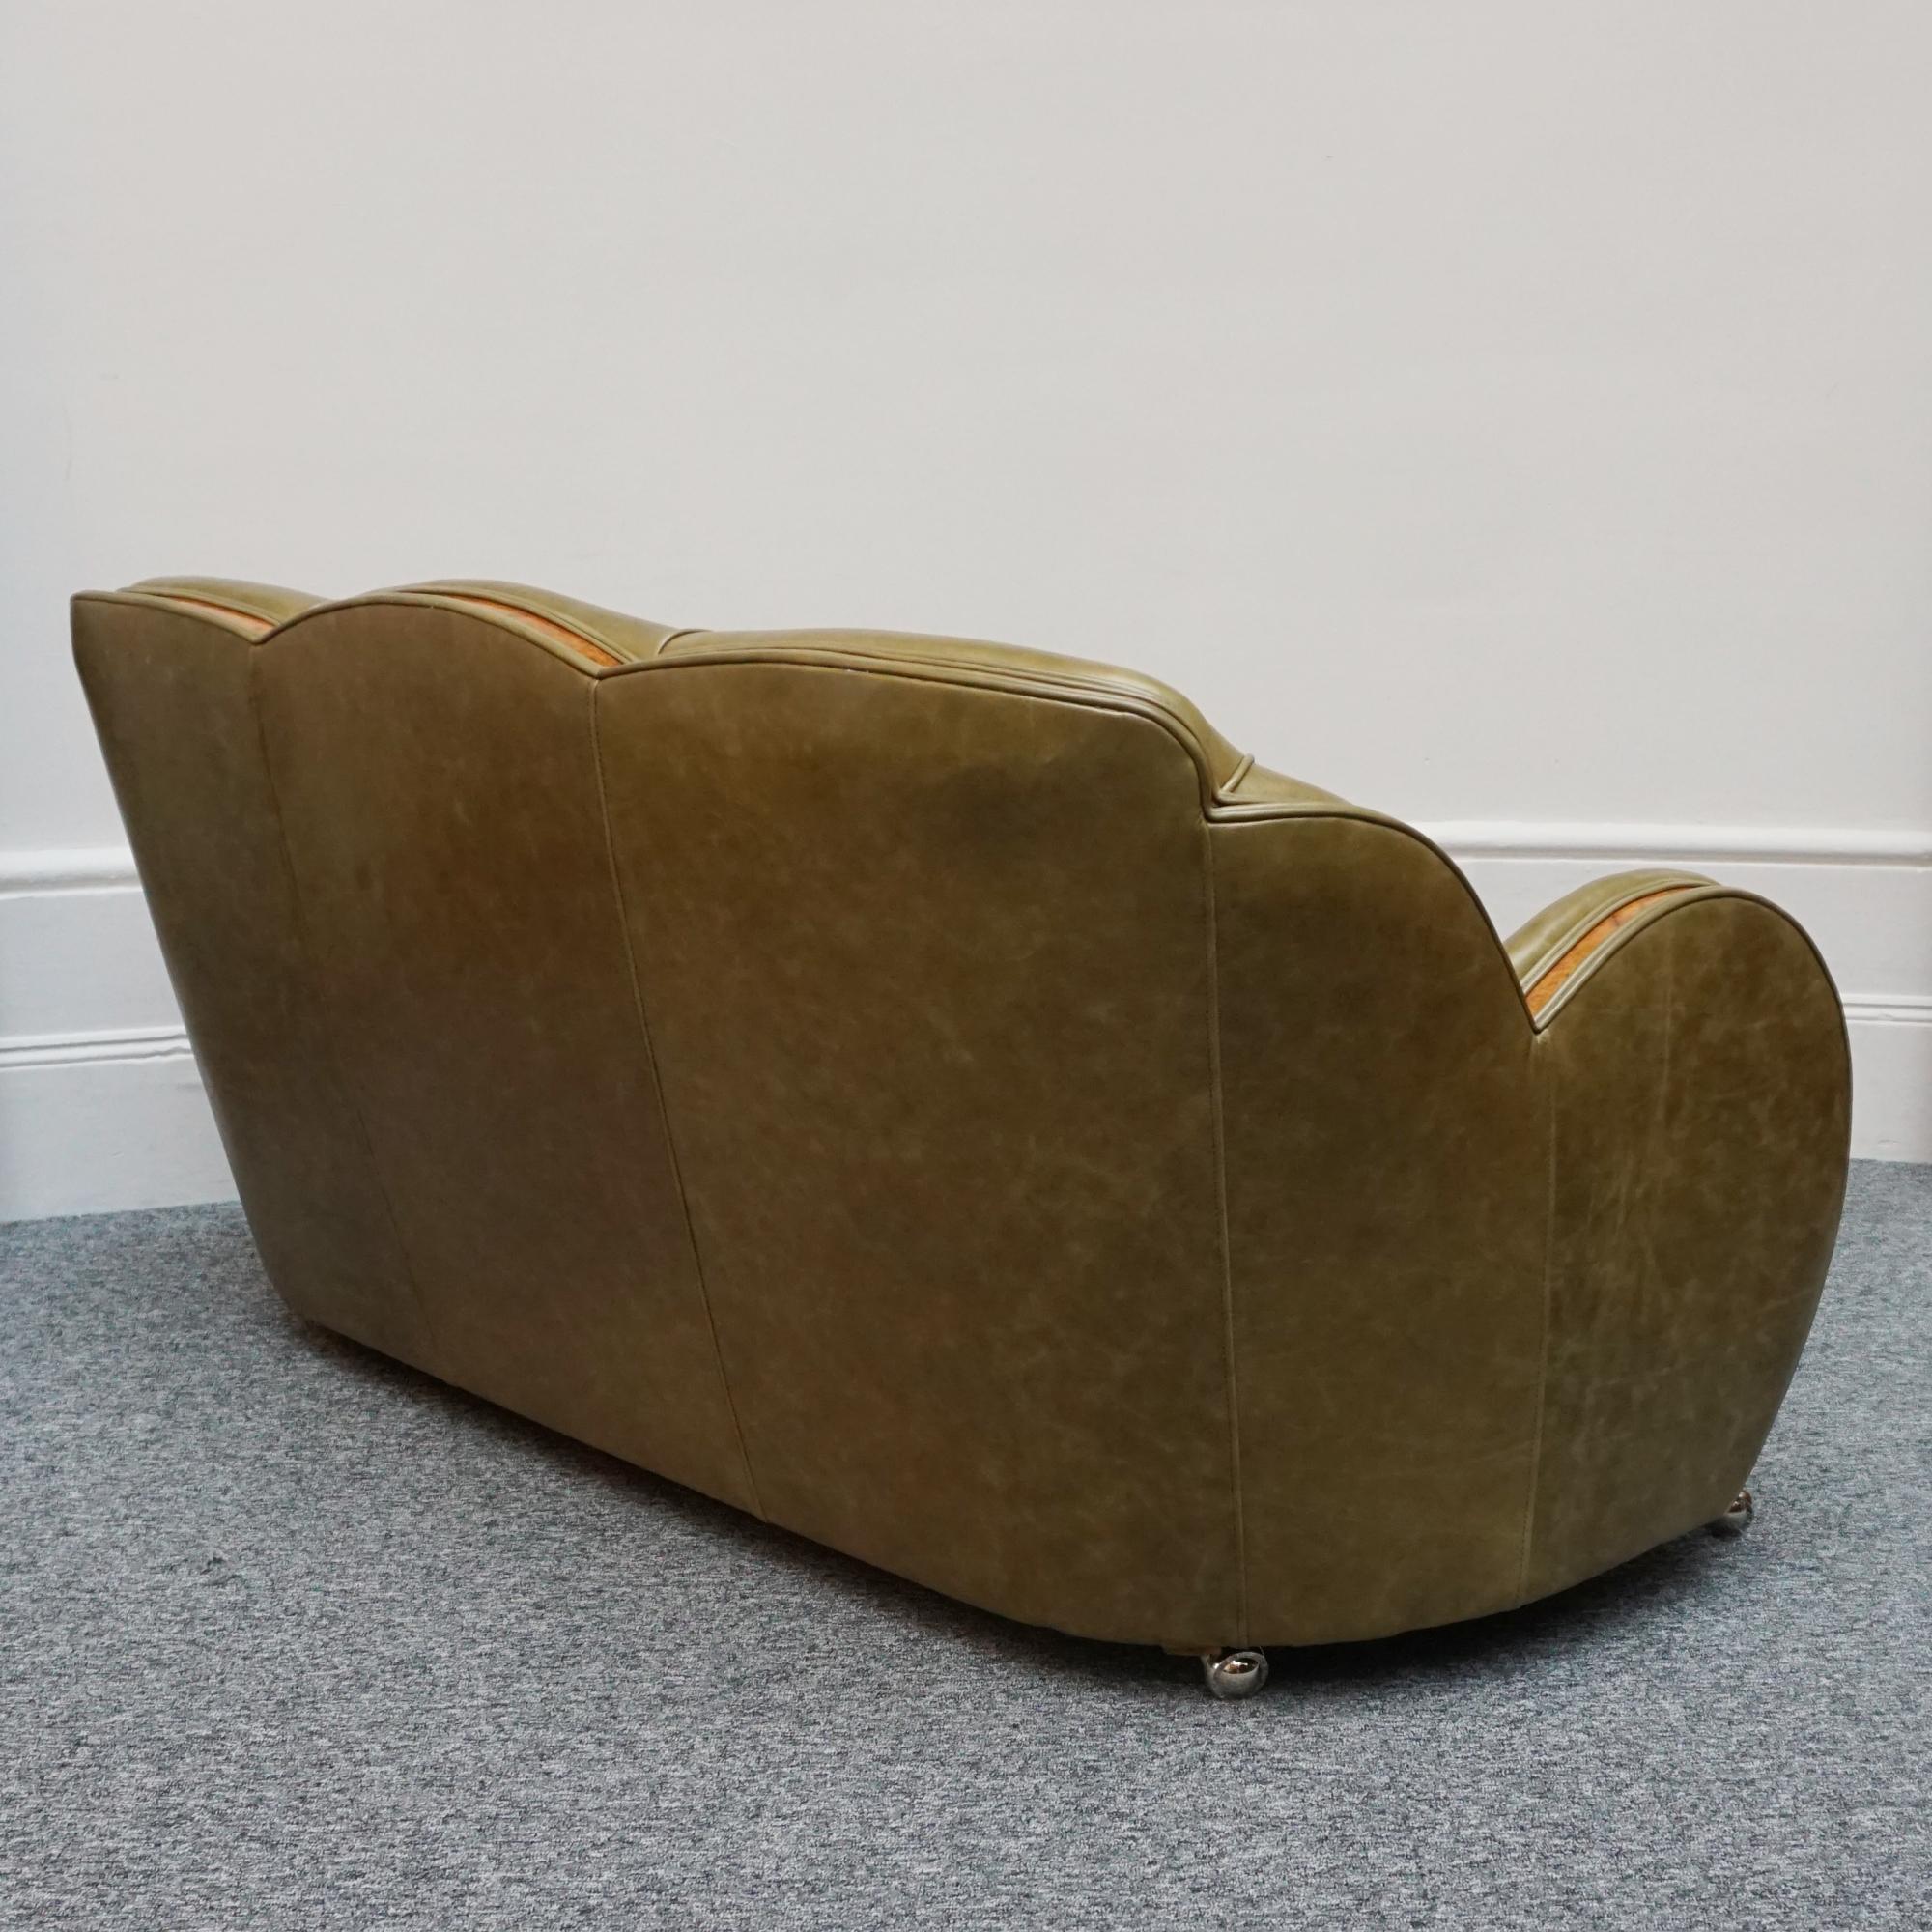 English Art Deco Cloud Sofa by Harry & Lou Epstein Upholstered in Green Leather  For Sale 7